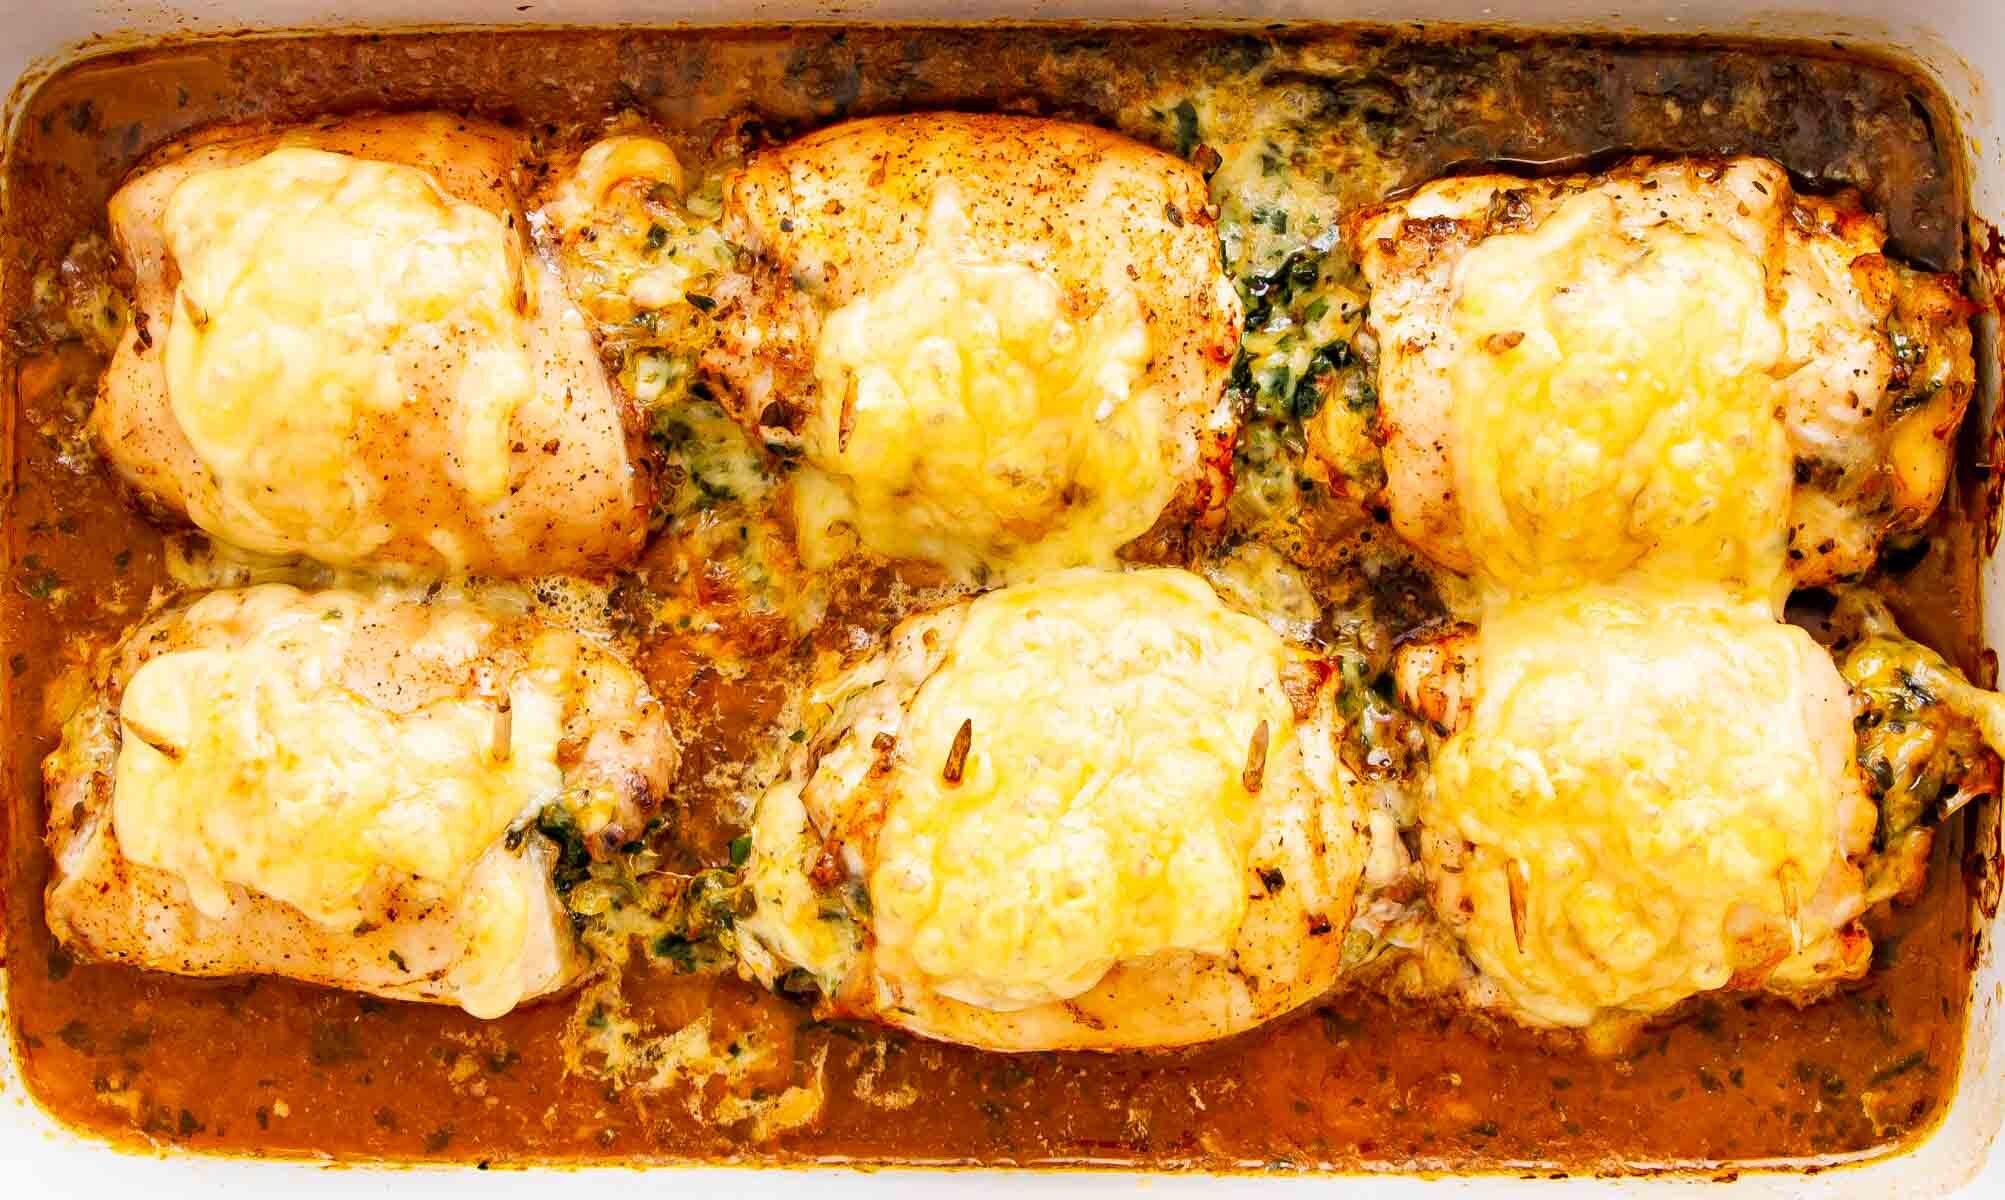 Spinach and cheese-stuffed chicken thighs